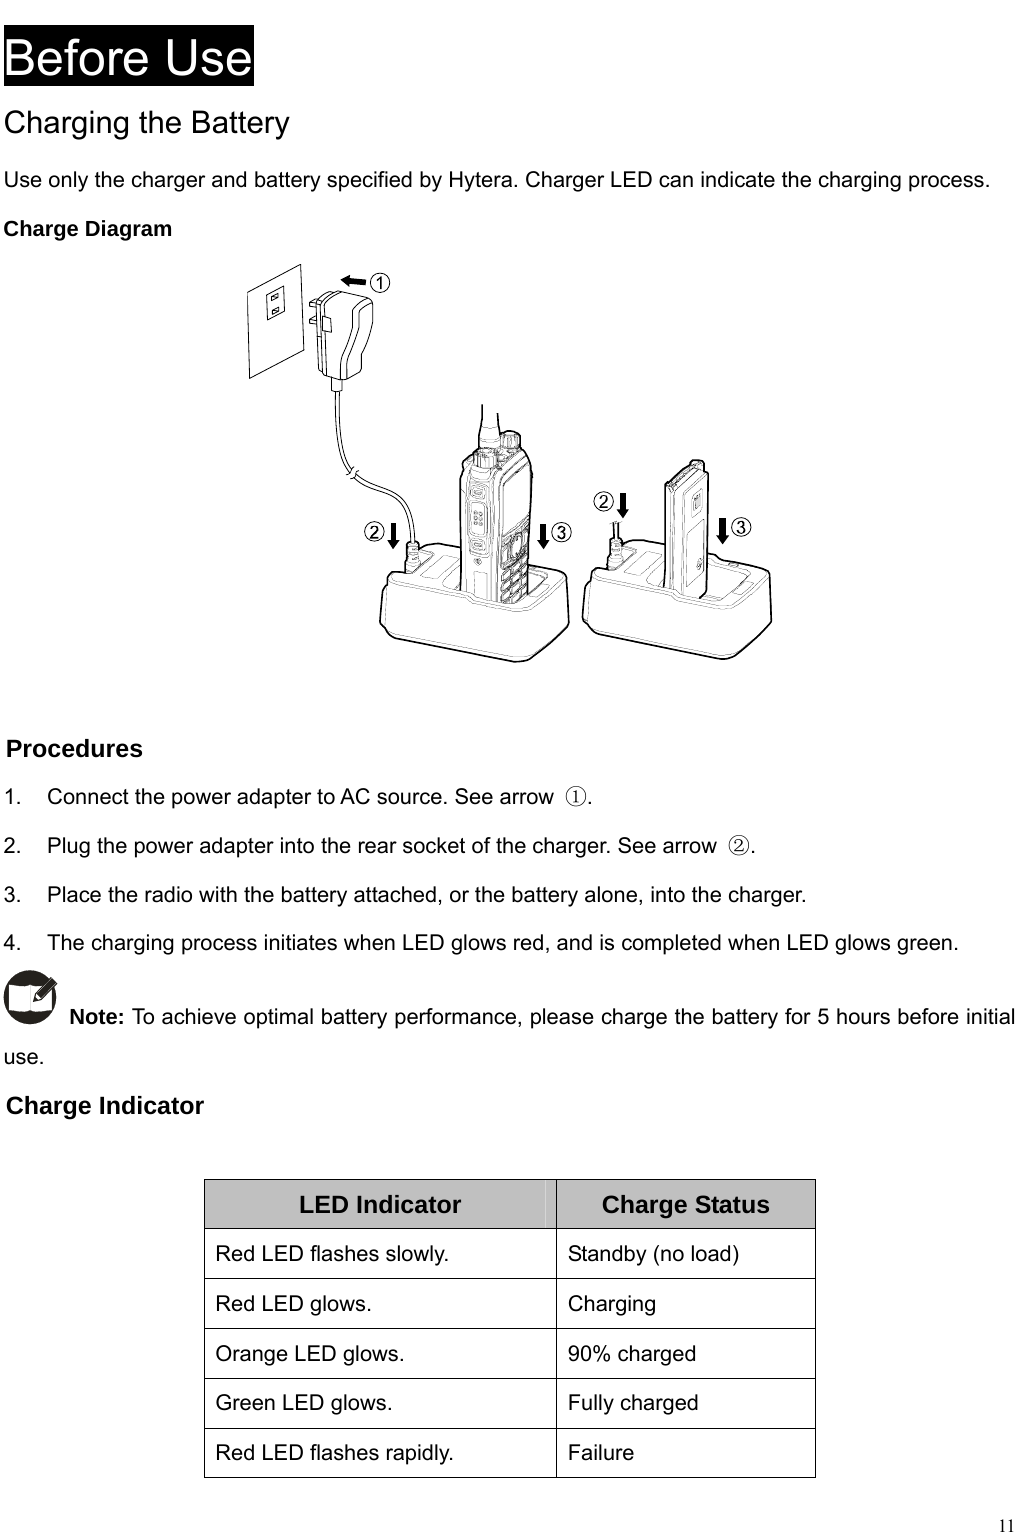                                                                                                            Before Use Charging the Battery Use only the charger and battery specified by Hytera. Charger LED can indicate the charging process.   Charge Diagram   Procedures 1.  Connect the power adapter to AC source. See arrow  ①. 2.  Plug the power adapter into the rear socket of the charger. See arrow  ②. 3.  Place the radio with the battery attached, or the battery alone, into the charger. 4.  The charging process initiates when LED glows red, and is completed when LED glows green.  Note: To achieve optimal battery performance, please charge the battery for 5 hours before initial use. Charge Indicator  LED Indicator Charge Status Red LED flashes slowly. Standby (no load) Red LED glows. Charging   Orange LED glows. 90% charged Green LED glows. Fully charged Red LED flashes rapidly. Failure  11